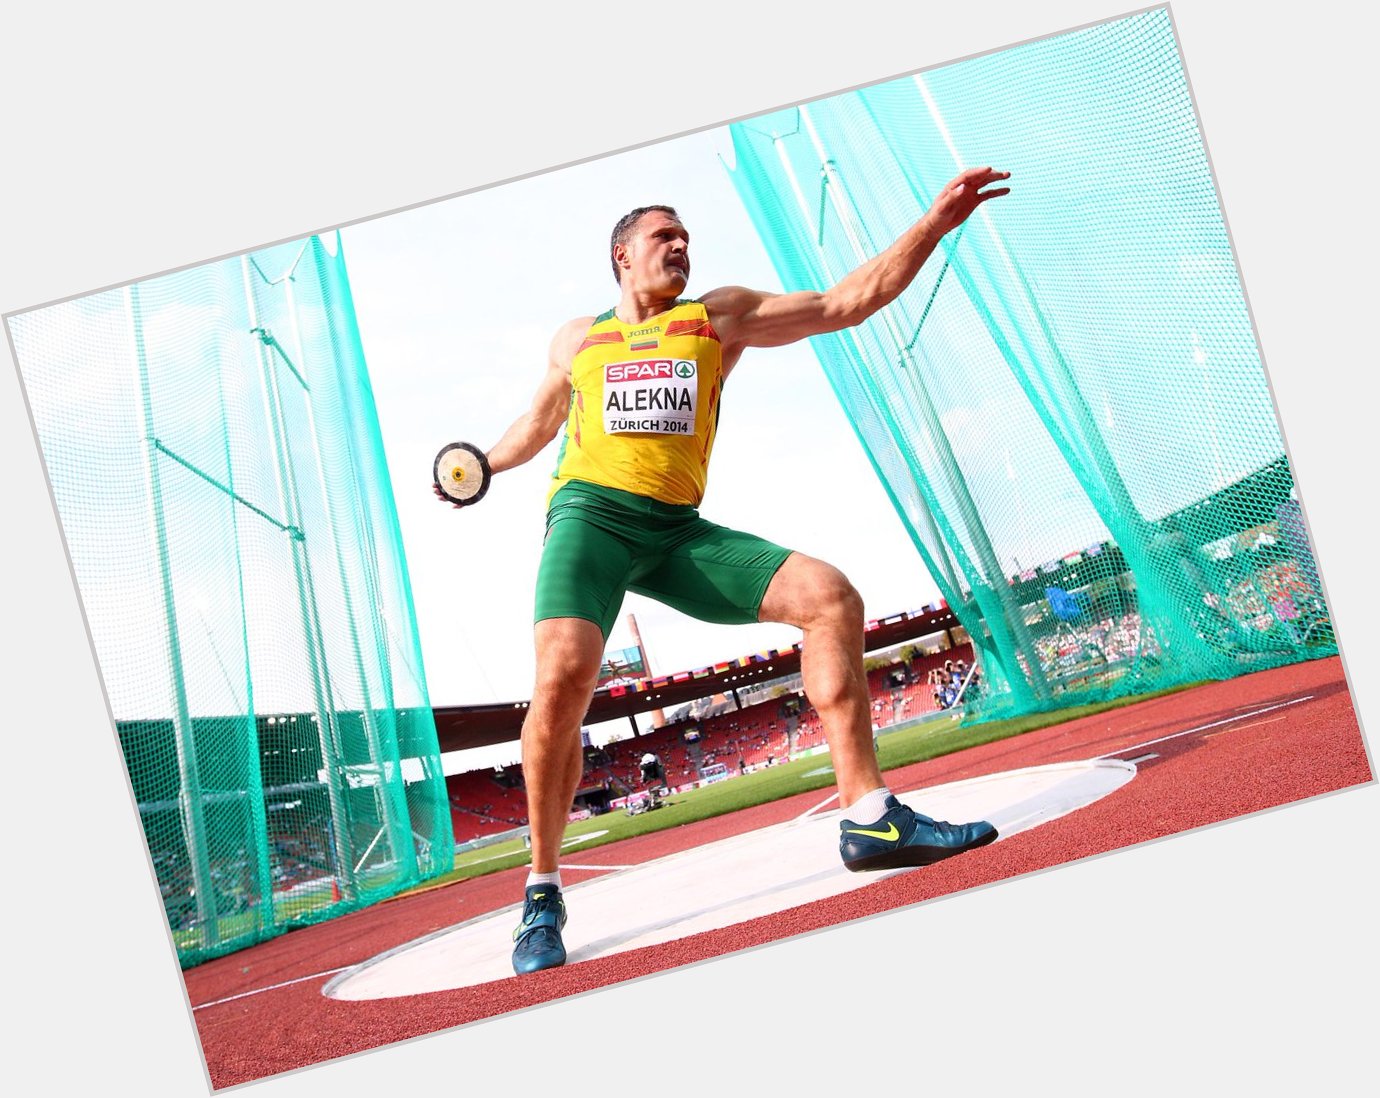 Happy birthday to the great Virgilijus Alekna! The Lithuanian is second on the European discus all-time list 